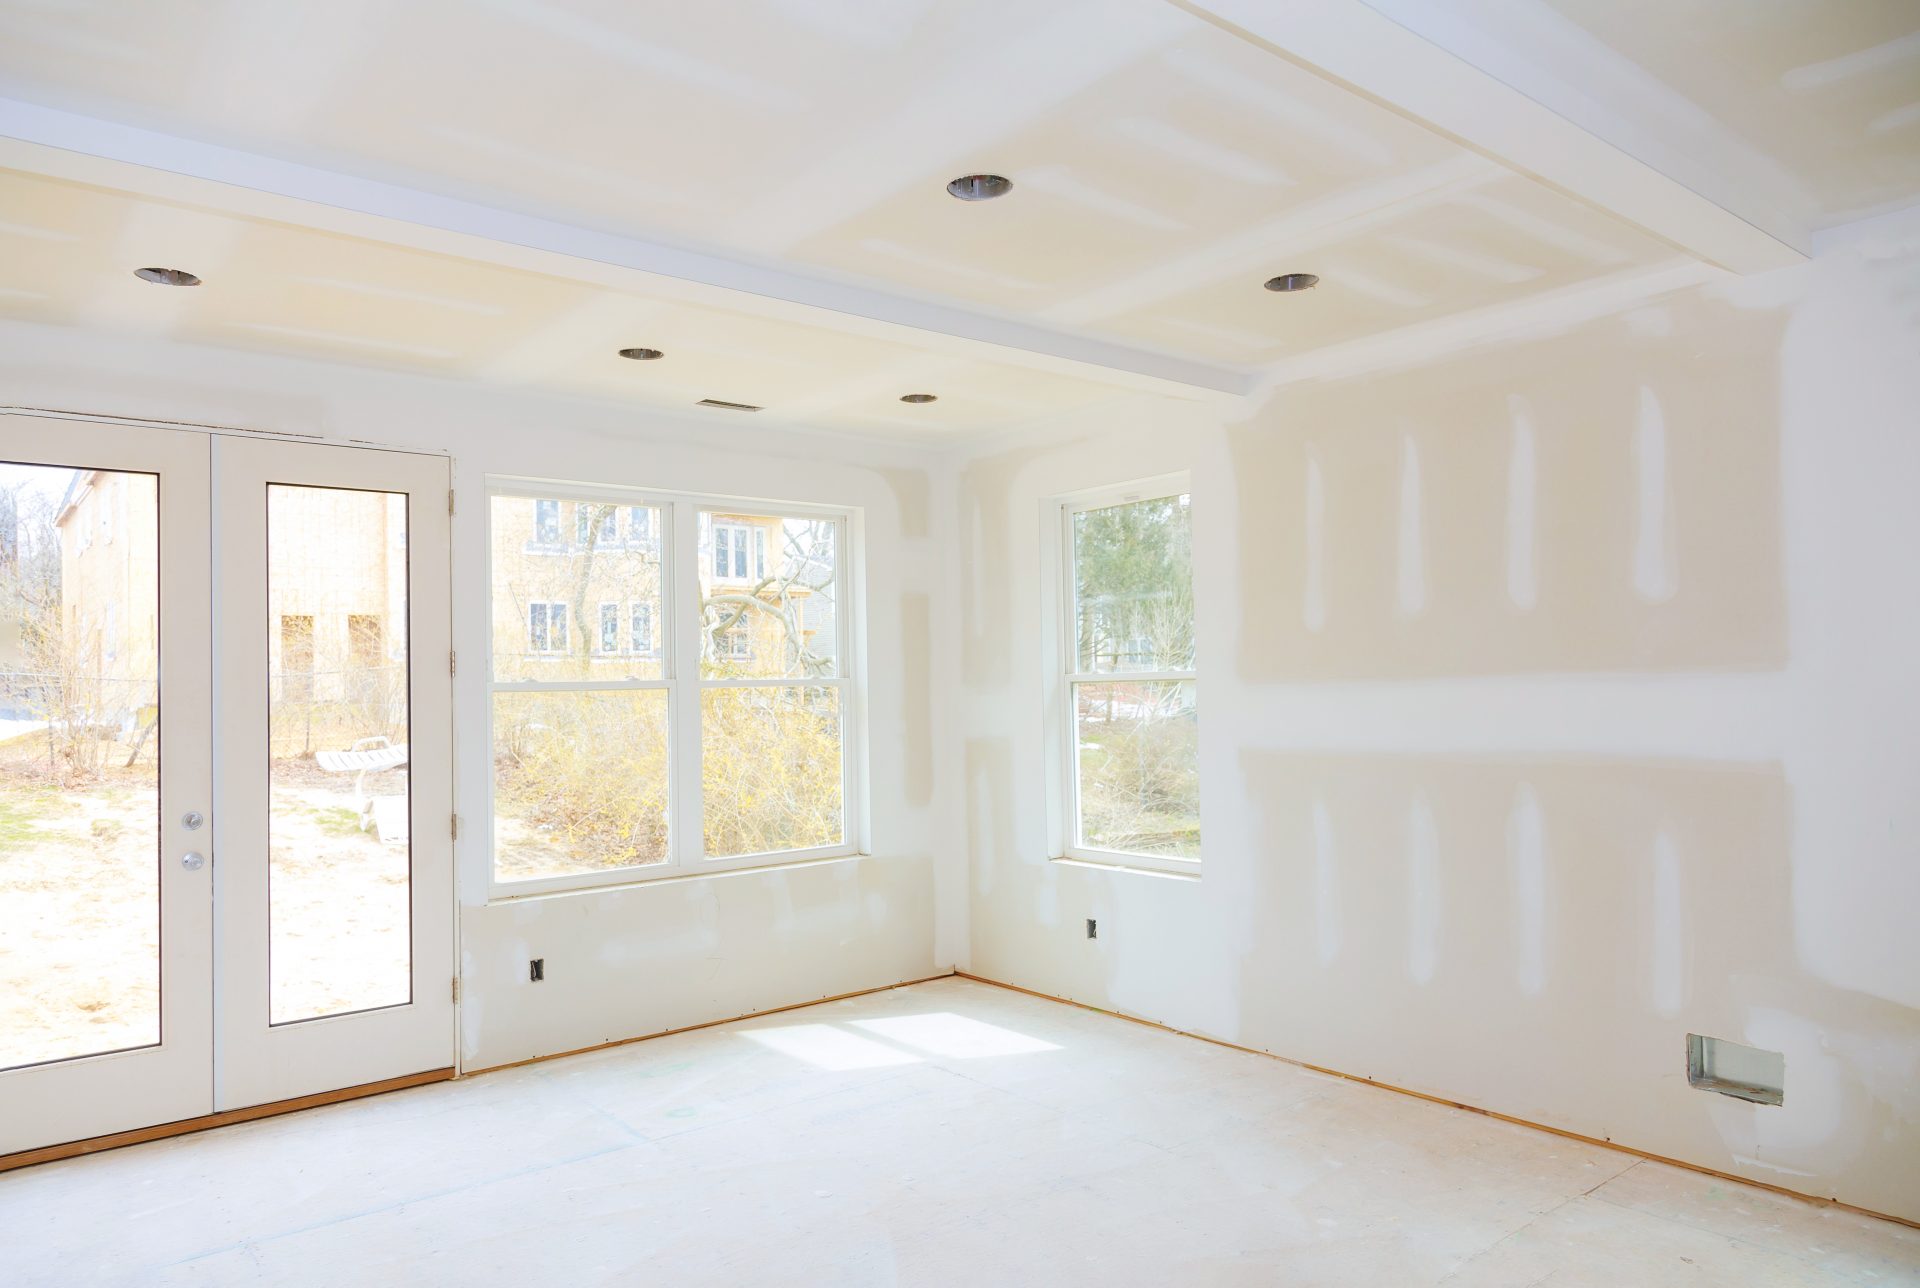 construction-building-industry-new-home-construction-interior-drywall-tape-new-home-before-installing